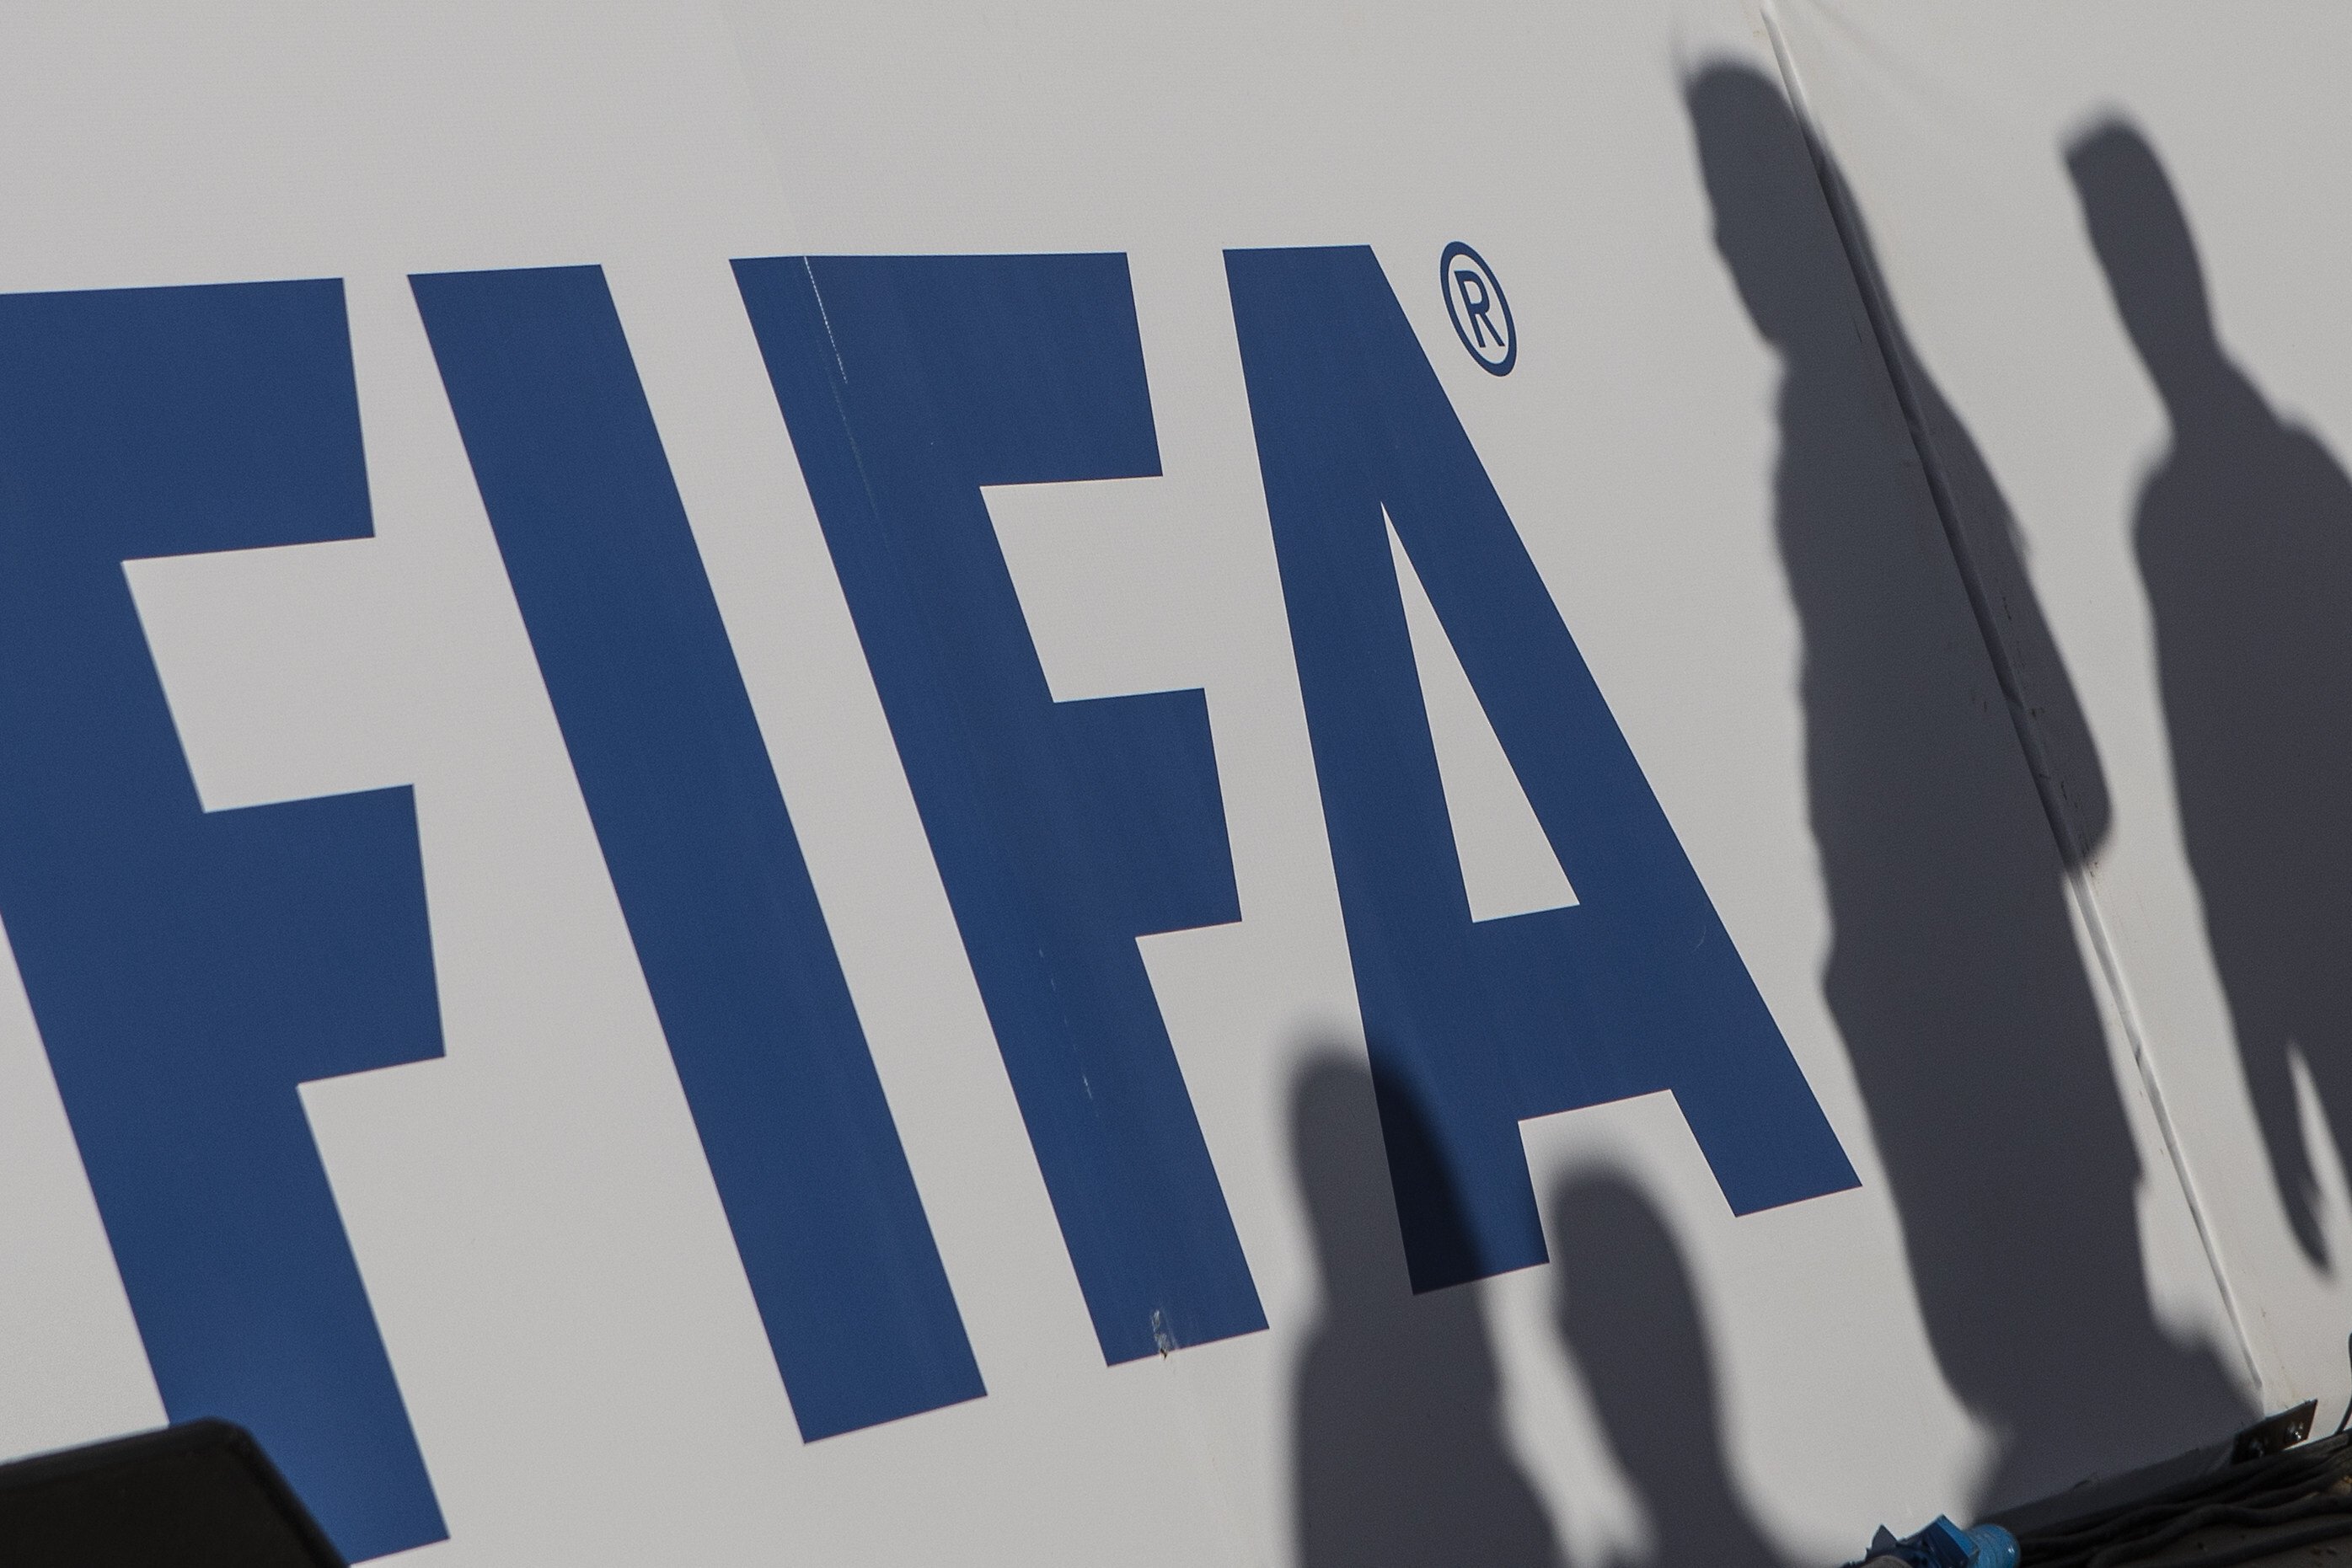 World football’s governing body Fifa has decided that no international competition shall be played in Russia. Photo: DPA